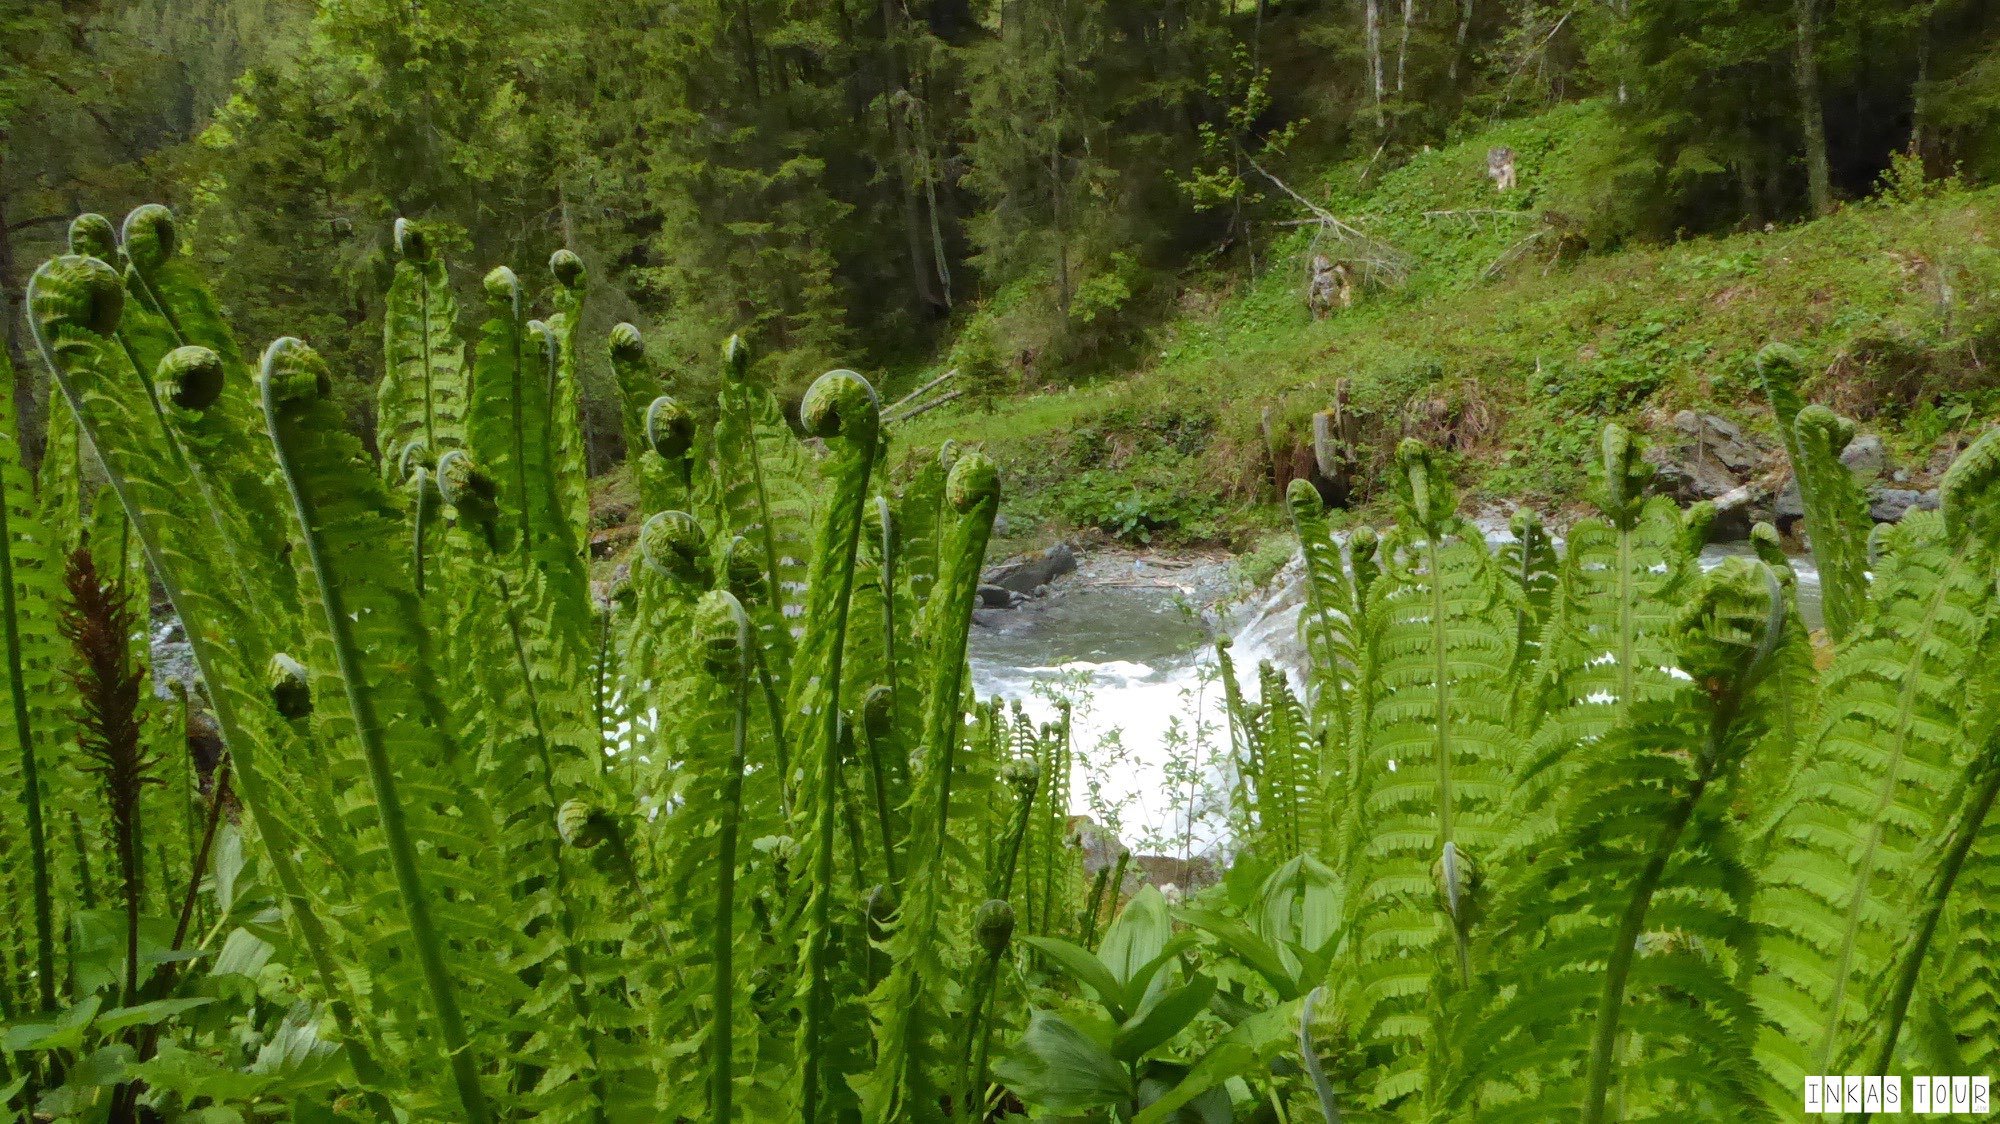  These Fern reminded me of New Zealand, and somehow I felt as if I was transported into a different World.